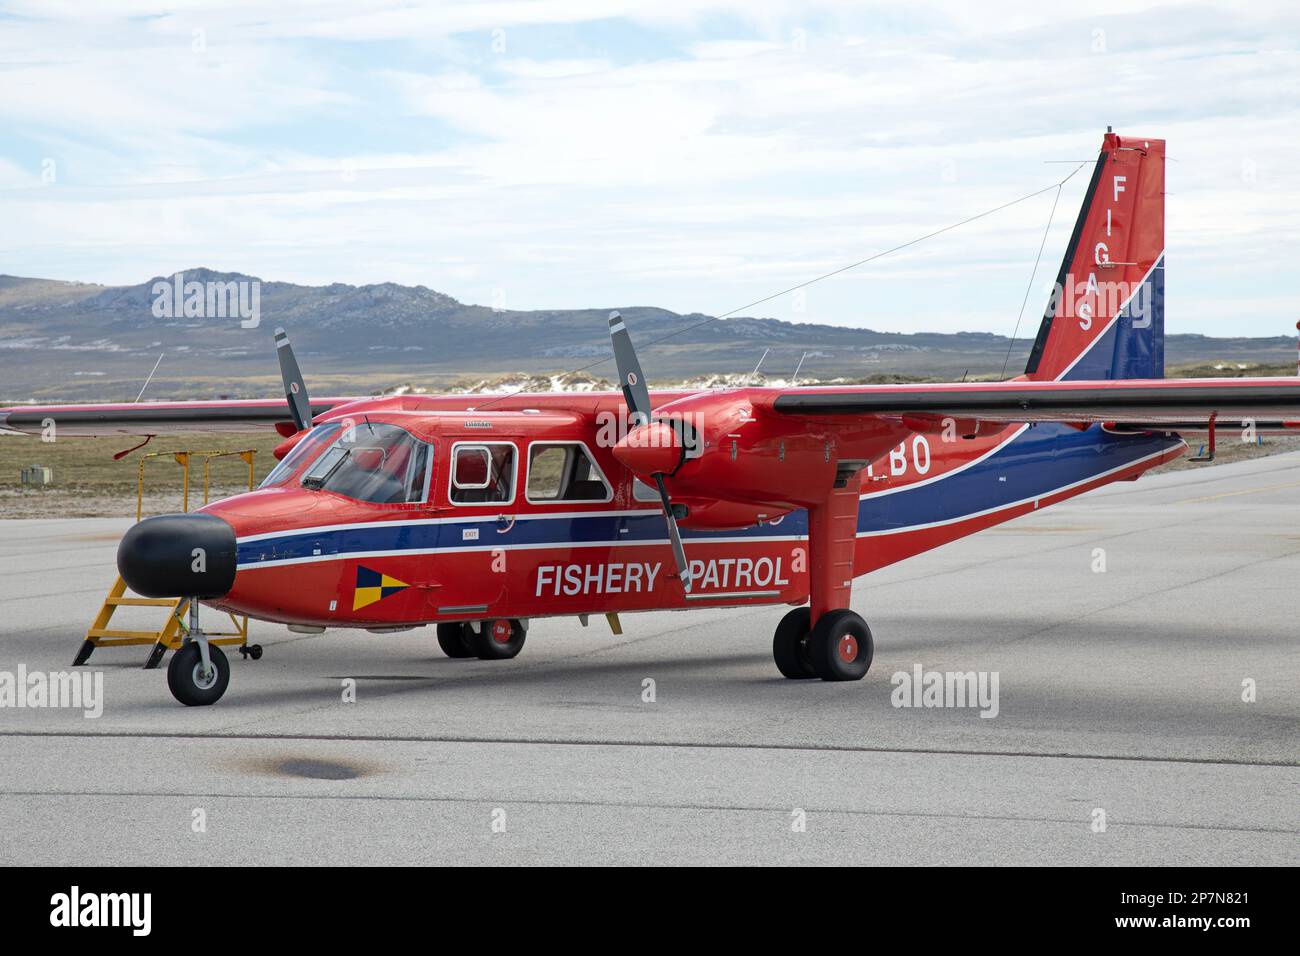 An Islander aircraft VP-FBO, of The Falkland Islands Government Air Service, FIGAS, at Stanley Airport, Falkland Islands. Used for Fishery Patrol. Stock Photo